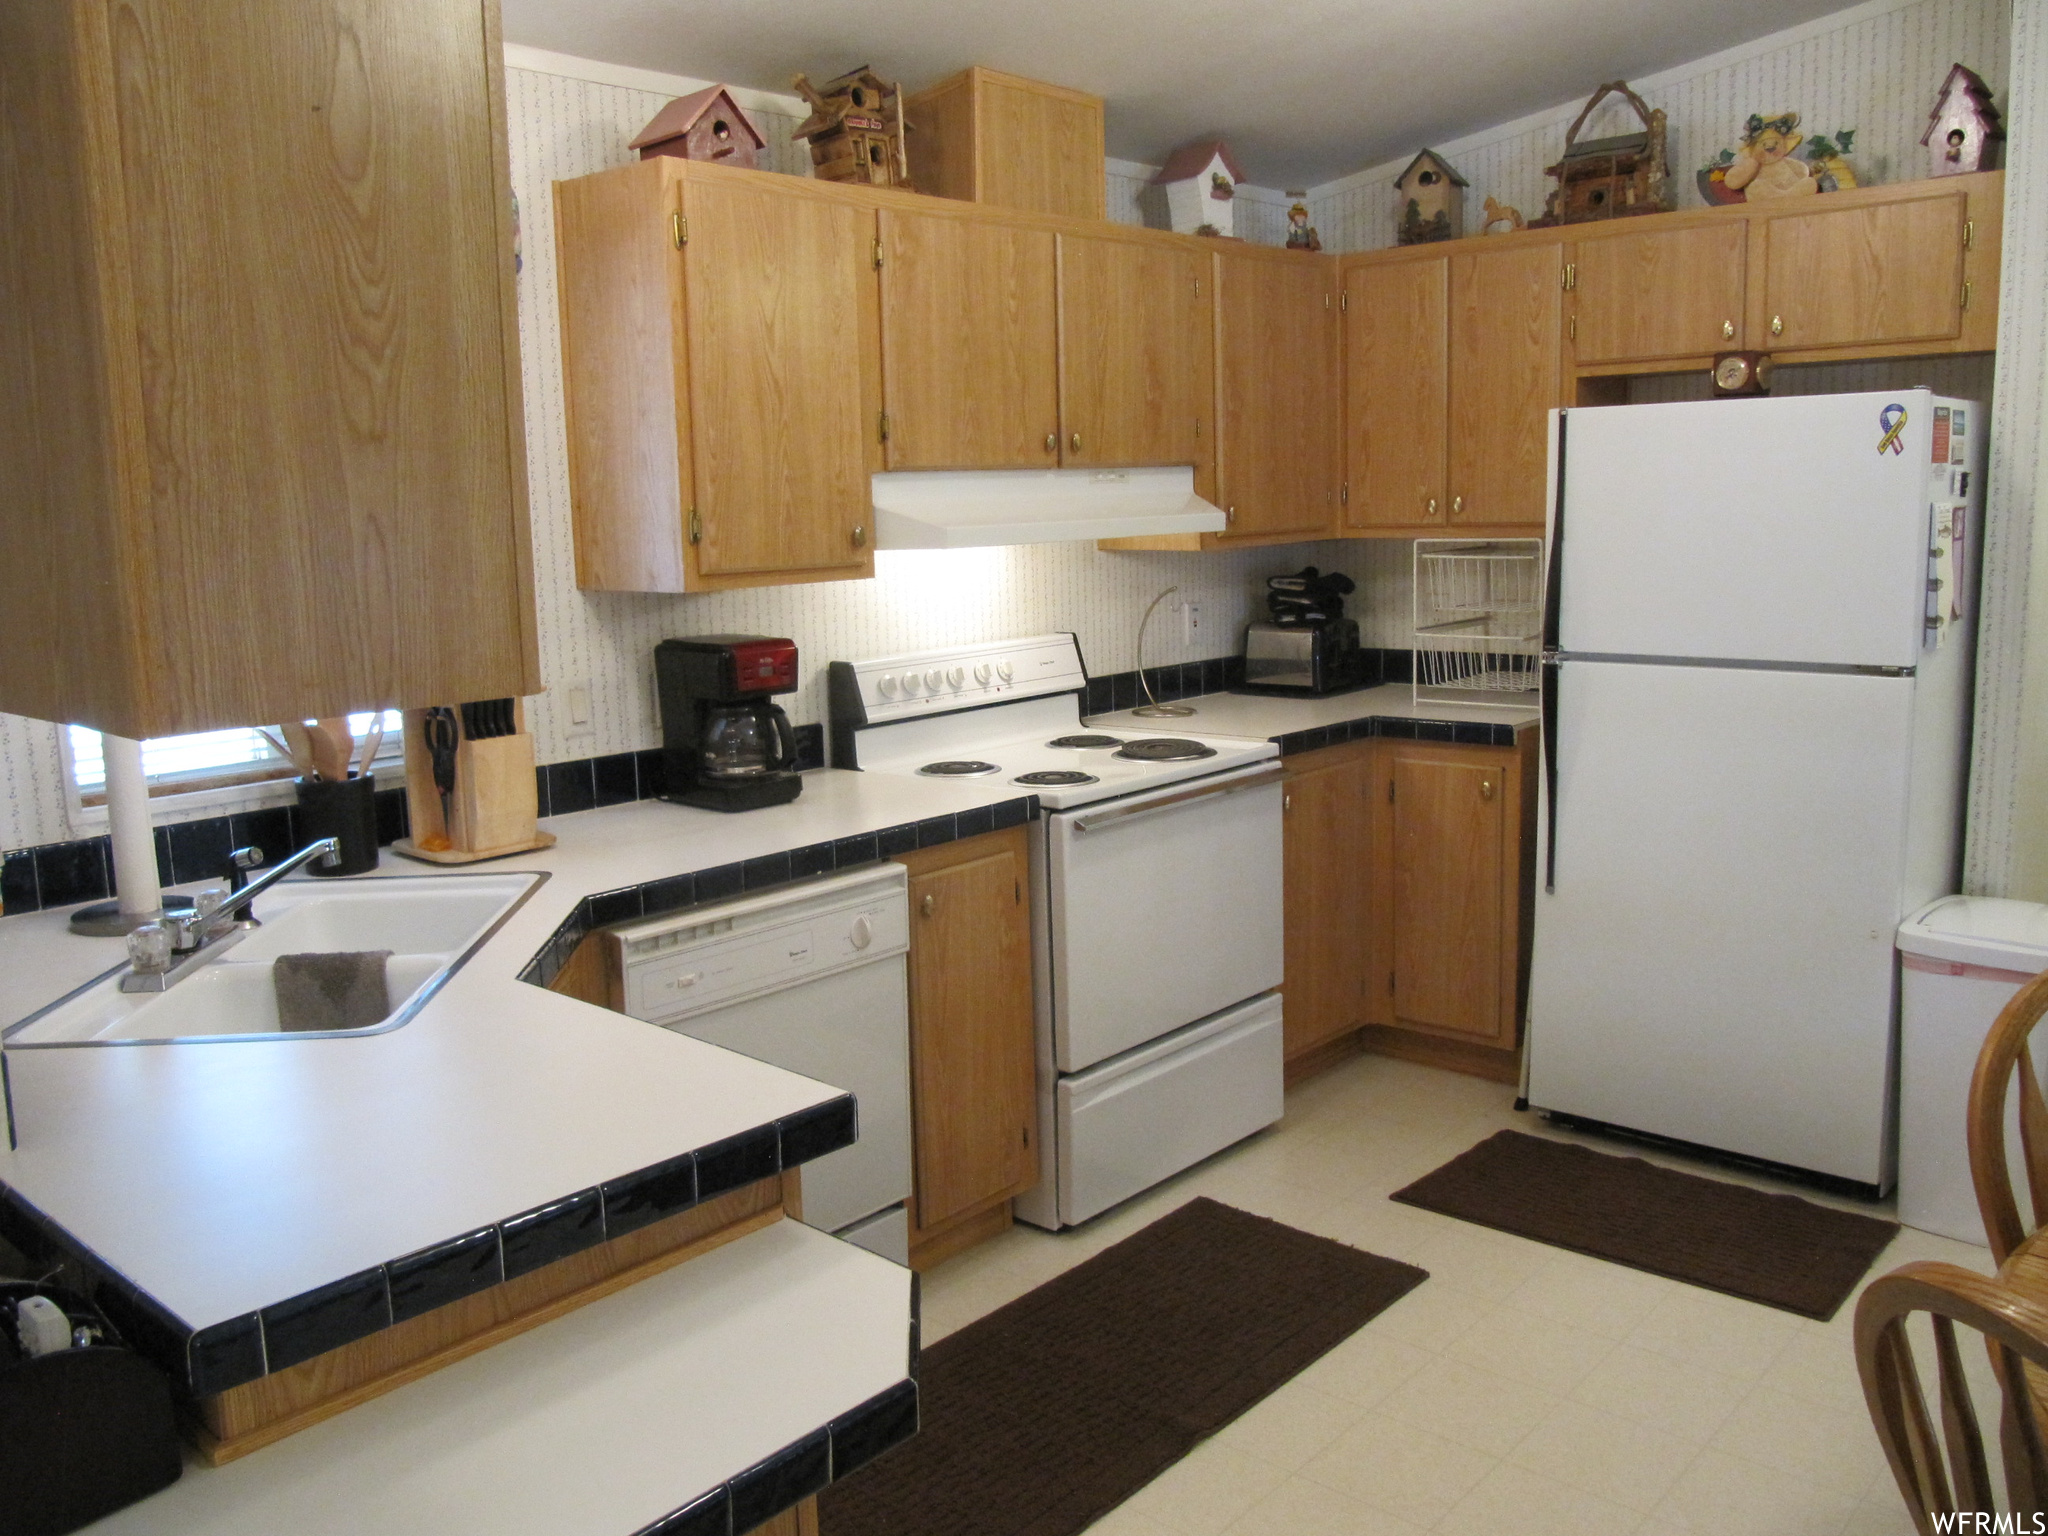 Kitchen with fume extractor, dishwasher, refrigerator, electric range oven, and brown cabinets